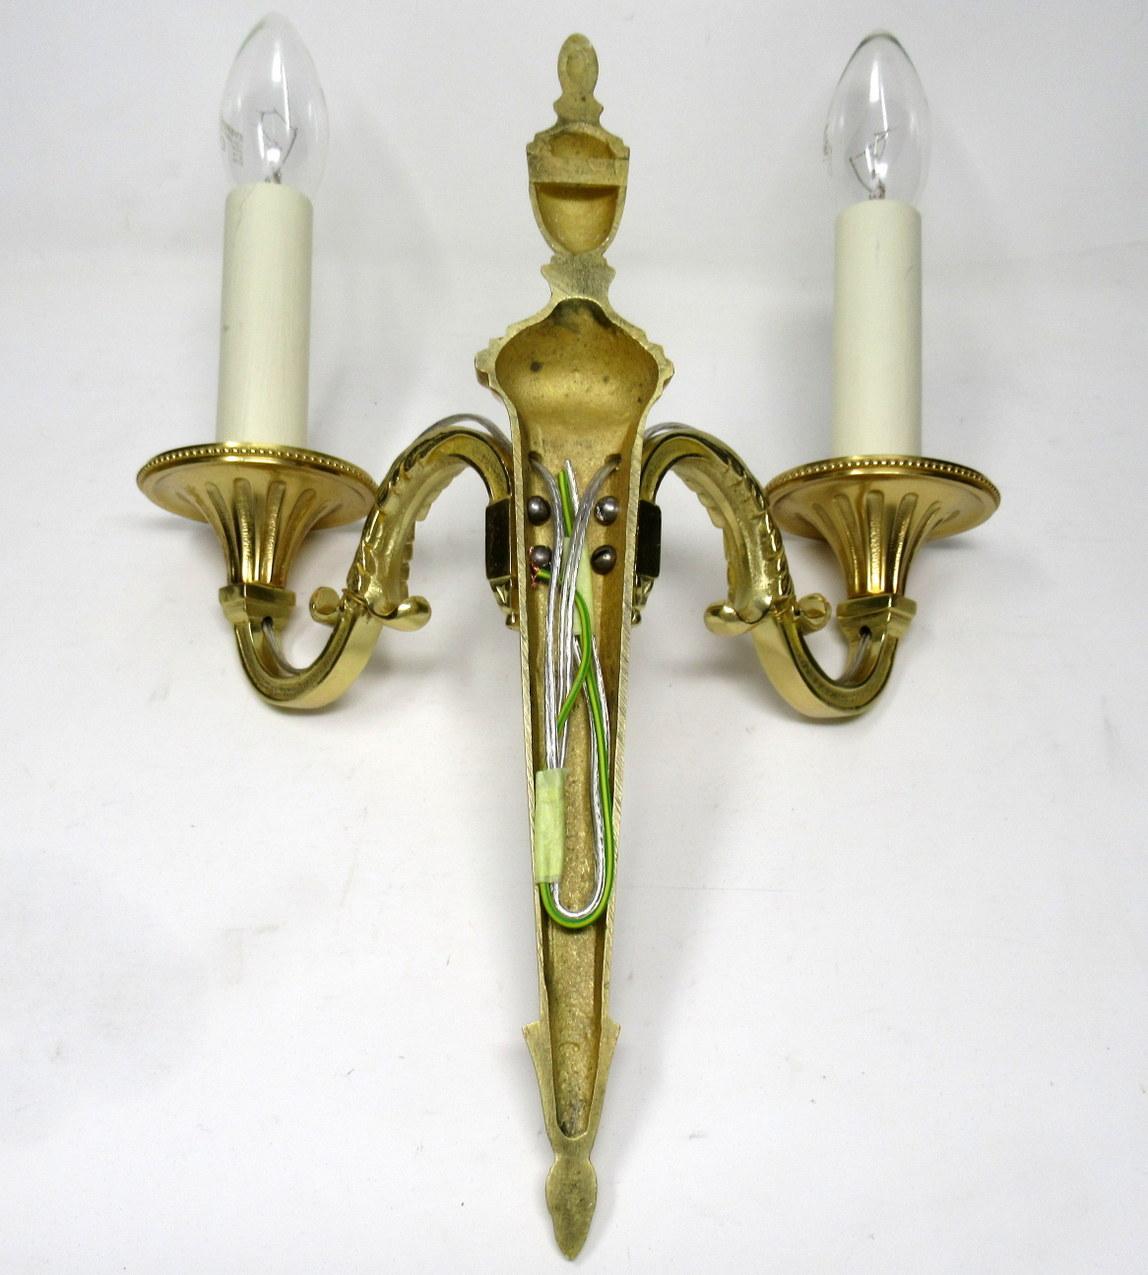 Edwardian Antique Pair of Ormolu Gilt Bronze Twin Lights Wall Candle Sconces 19th Century